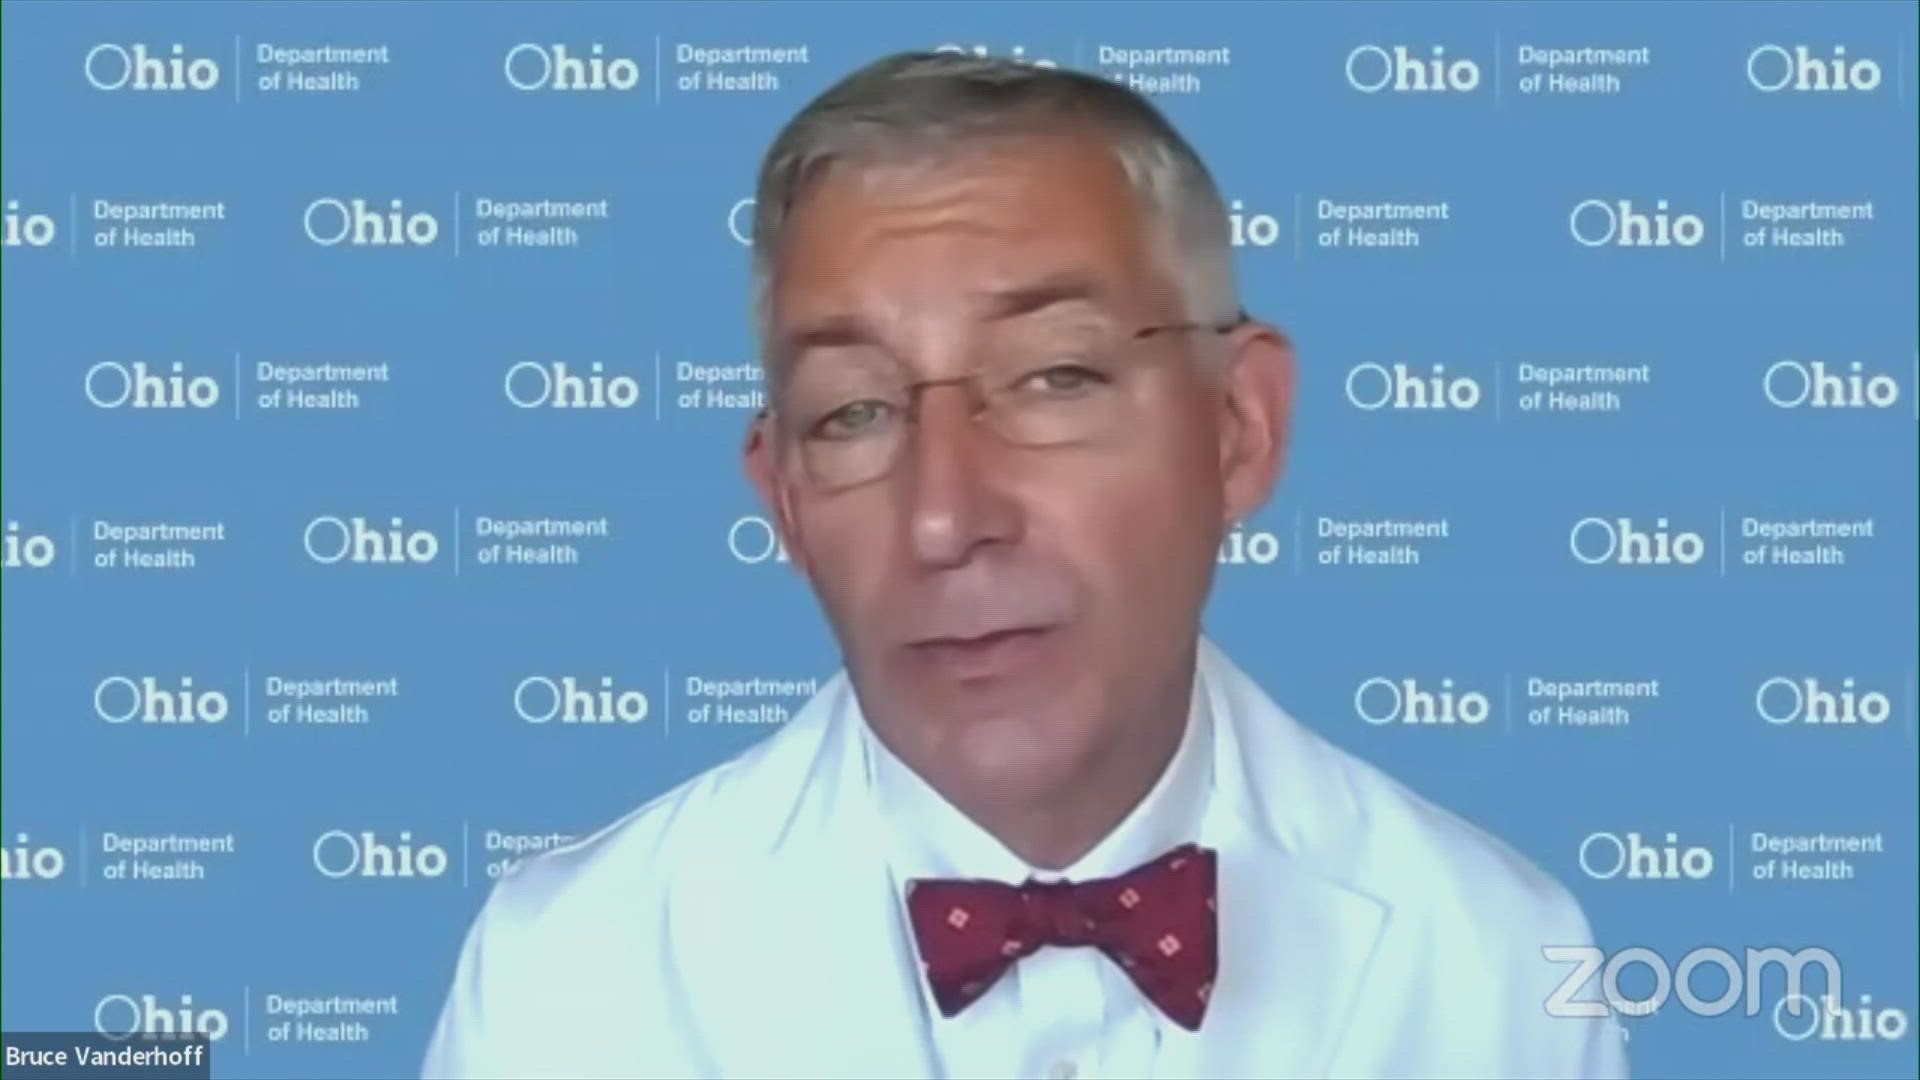 Officials from the Ohio Department of Health provided an update on COVID-19 in the state of Ohio.